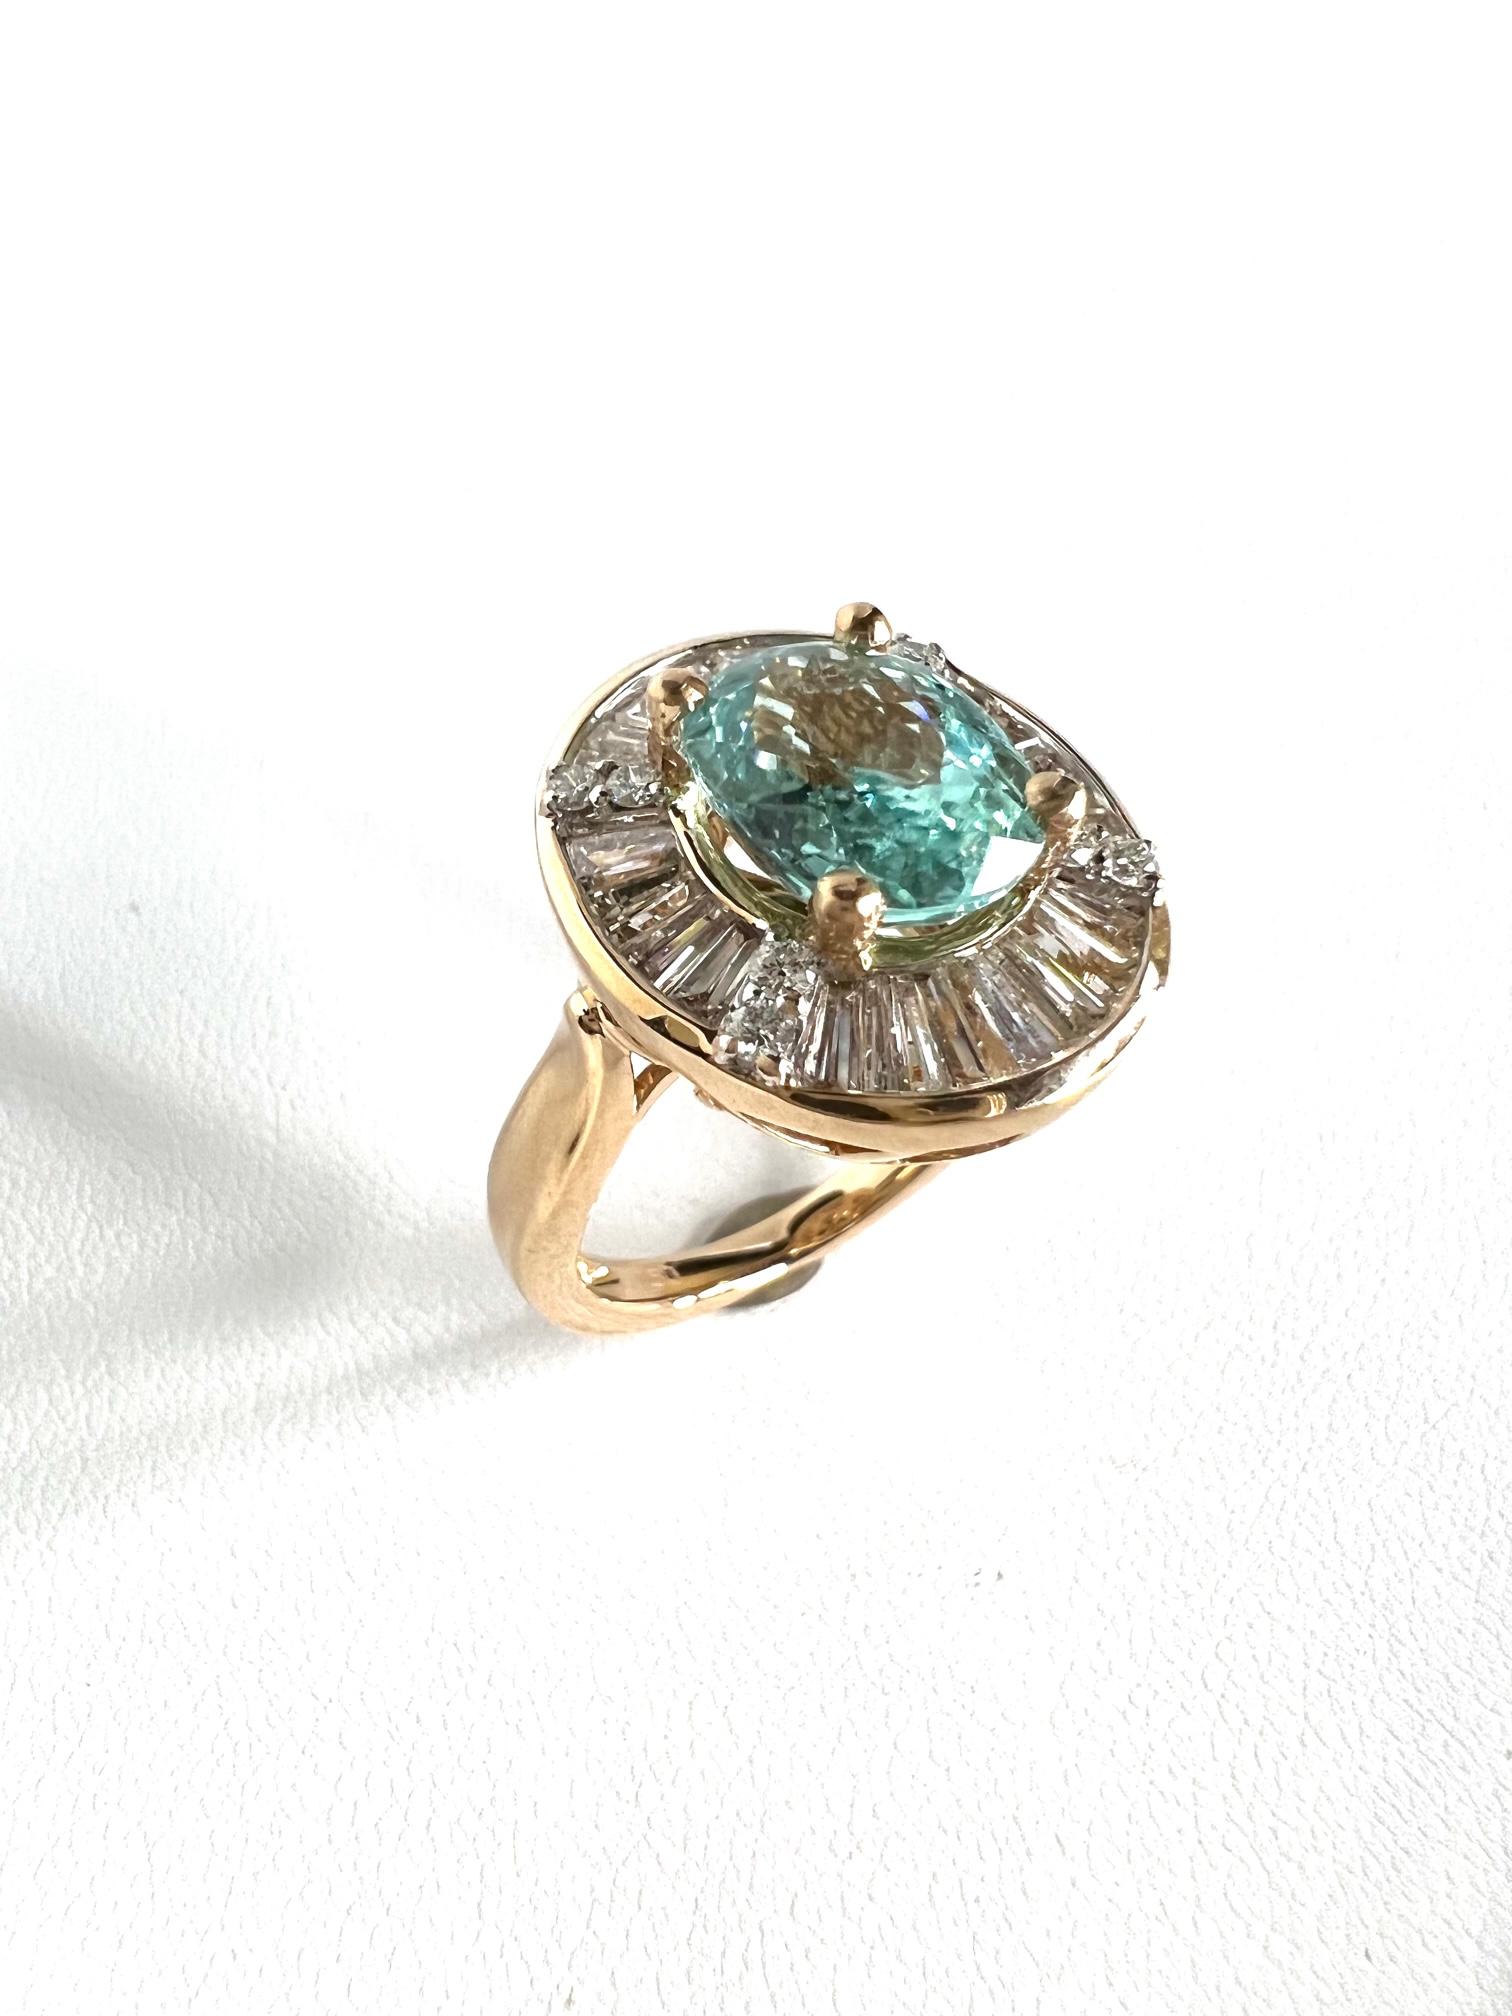 Thomas Leyser is renowned for his contemporary jewellery designs utilizing fine gemstones.

1 Ring in 18k red gold with 1 Paraiba Tourmaline fac. oval 10x7,8mm, 2,85cts. + 22 diamonds tapezes 1,58cts. H/SI + 8 diamonds round 0,15cts. H/SI.

Ringsize